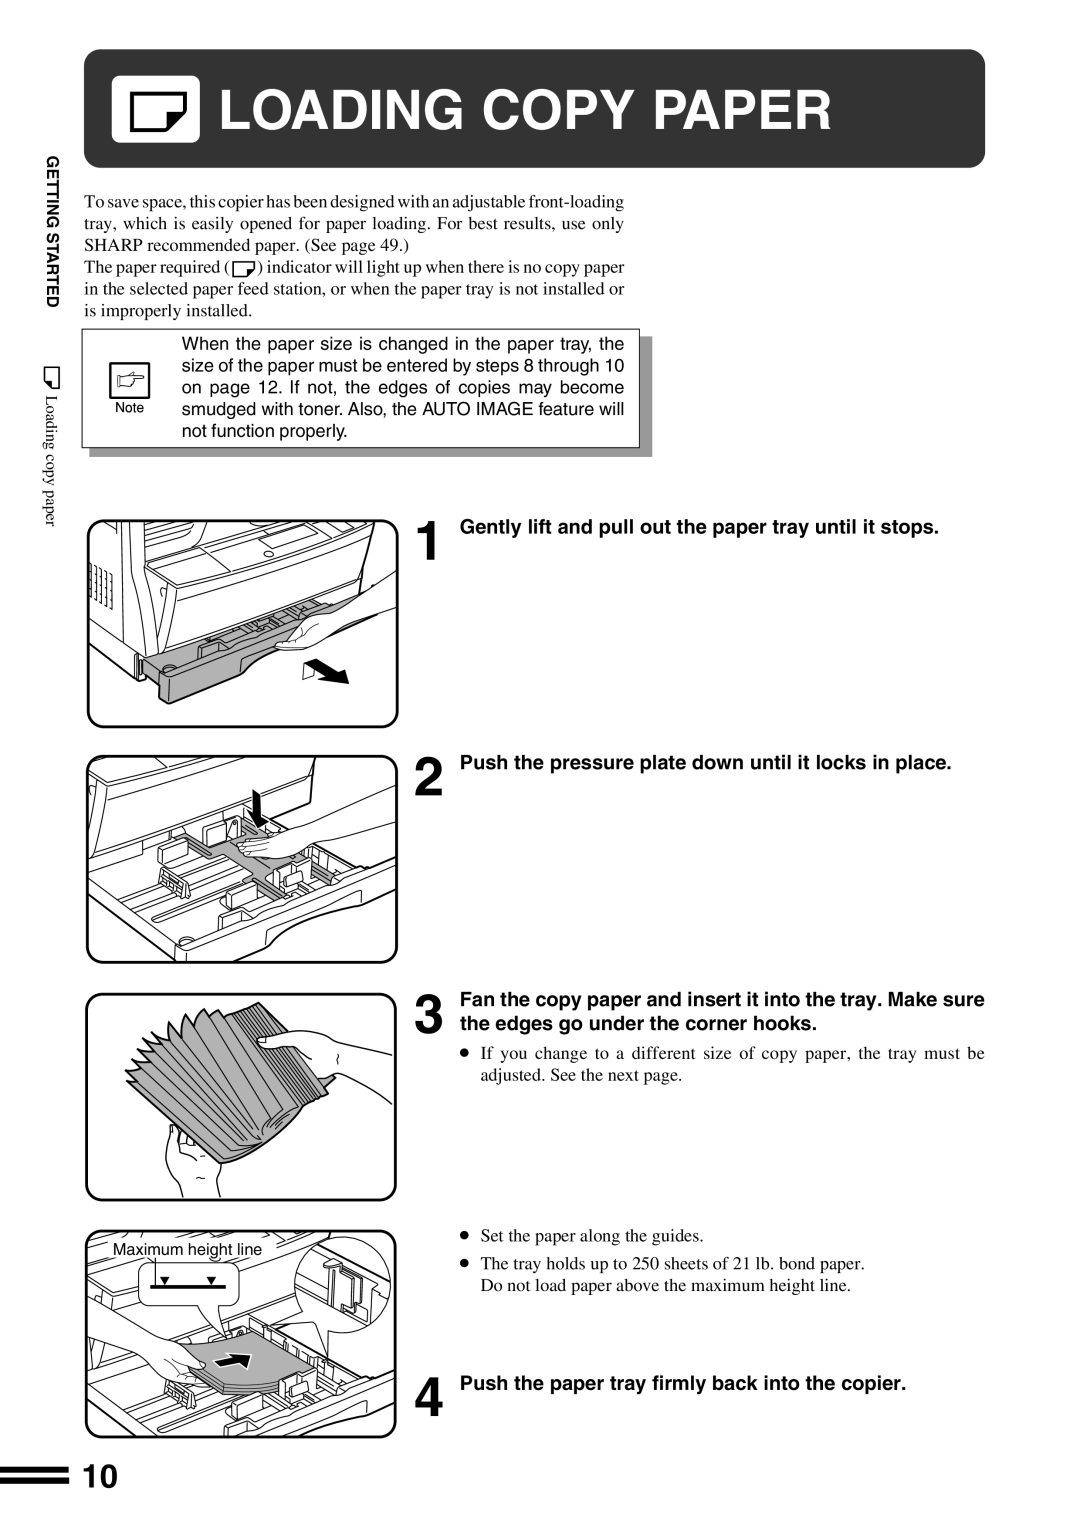 Sharp AR-162S operation manual Loading Copy Paper, Gently lift and pull out the paper tray until it stops 